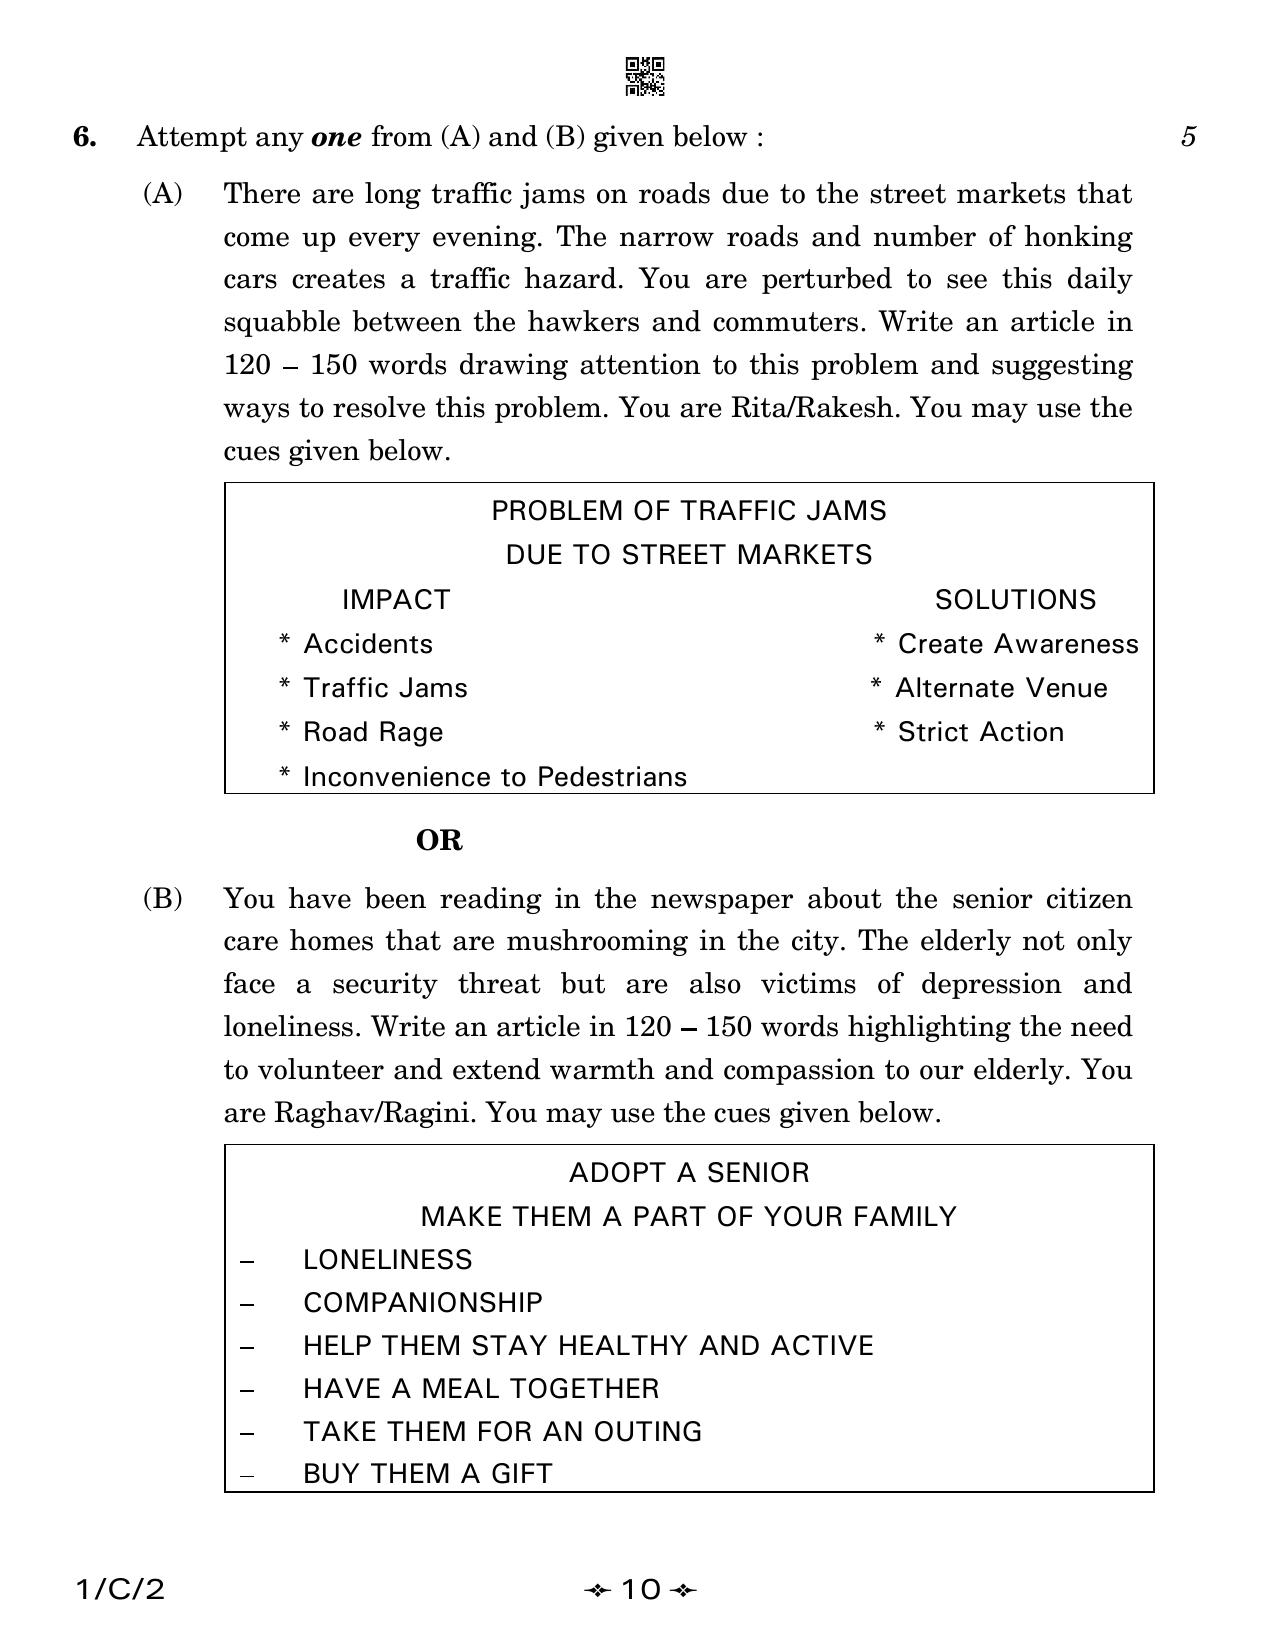 CBSE Class 12 1-2 English Core 2023 (Compartment) Question Paper - Page 10